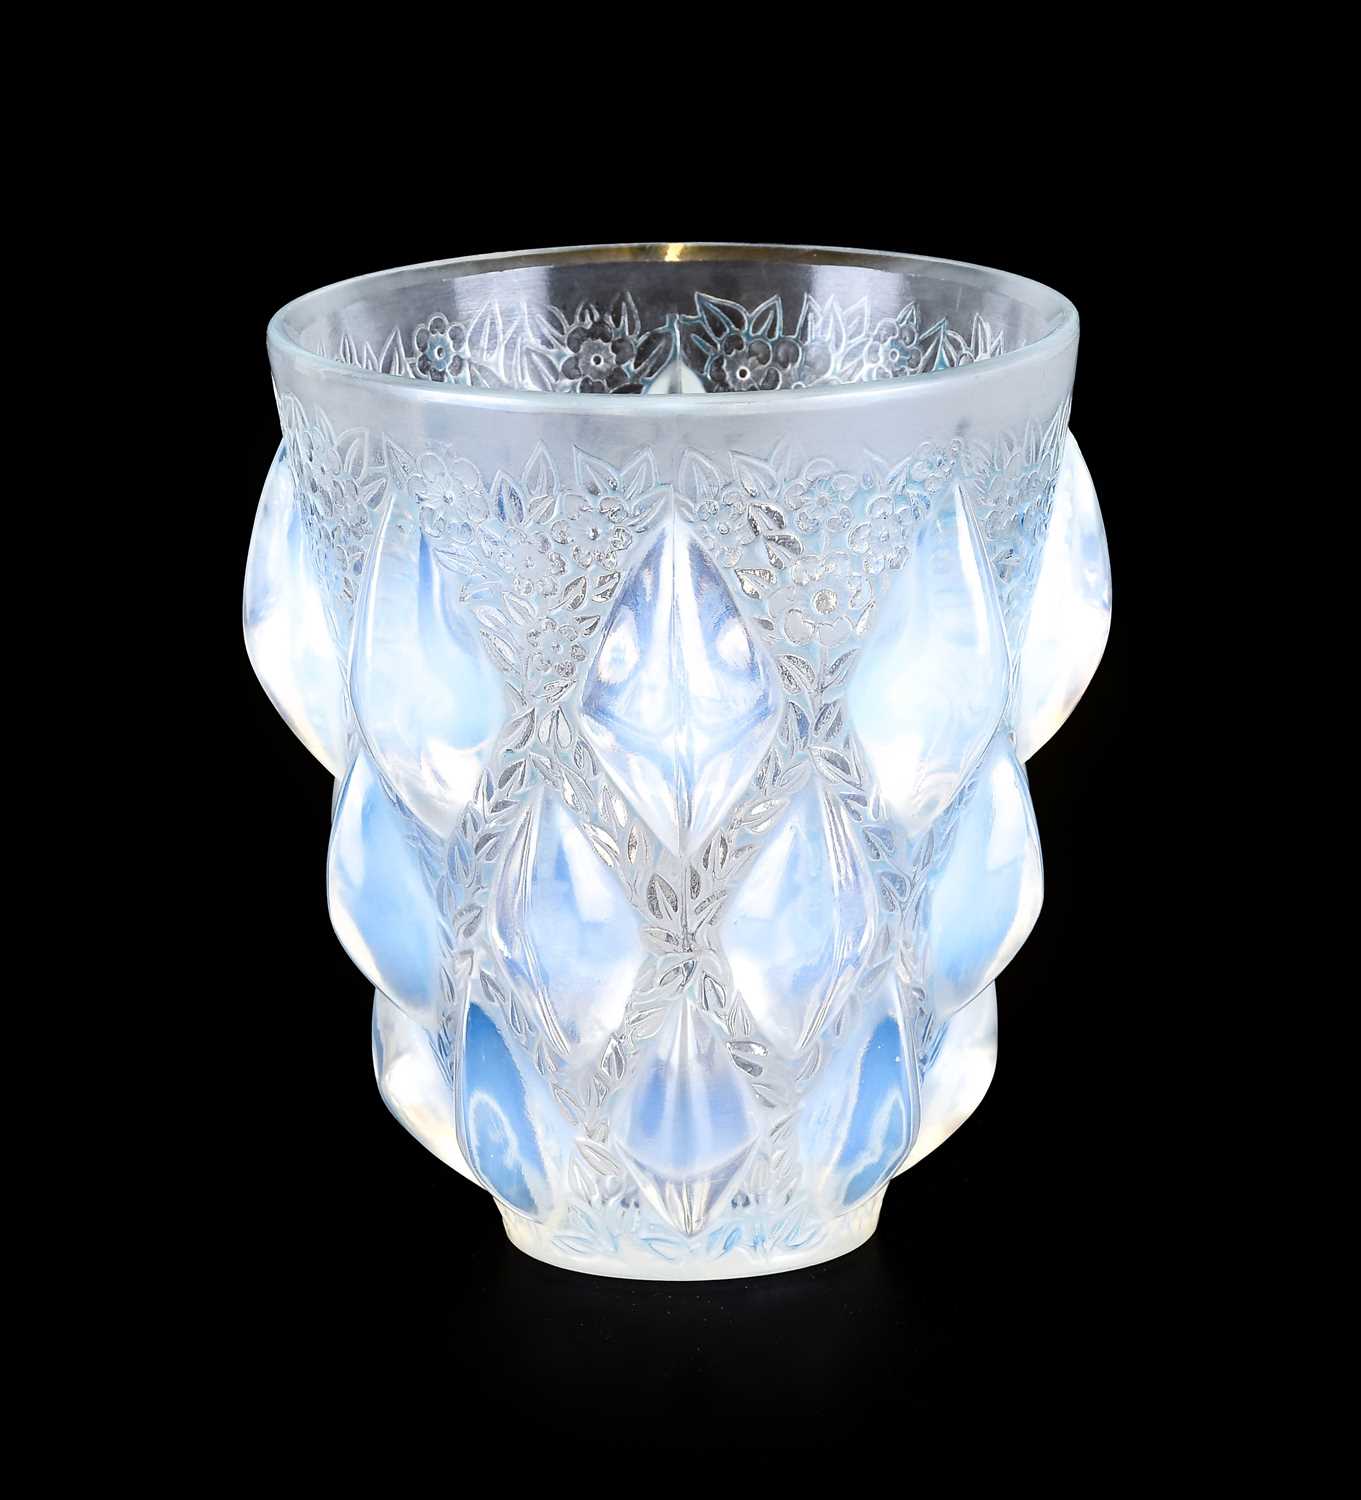 René Lalique (French, 1860-1945): An Opalescent, Clear and Frosted Glass Rampillon Vase, moulded